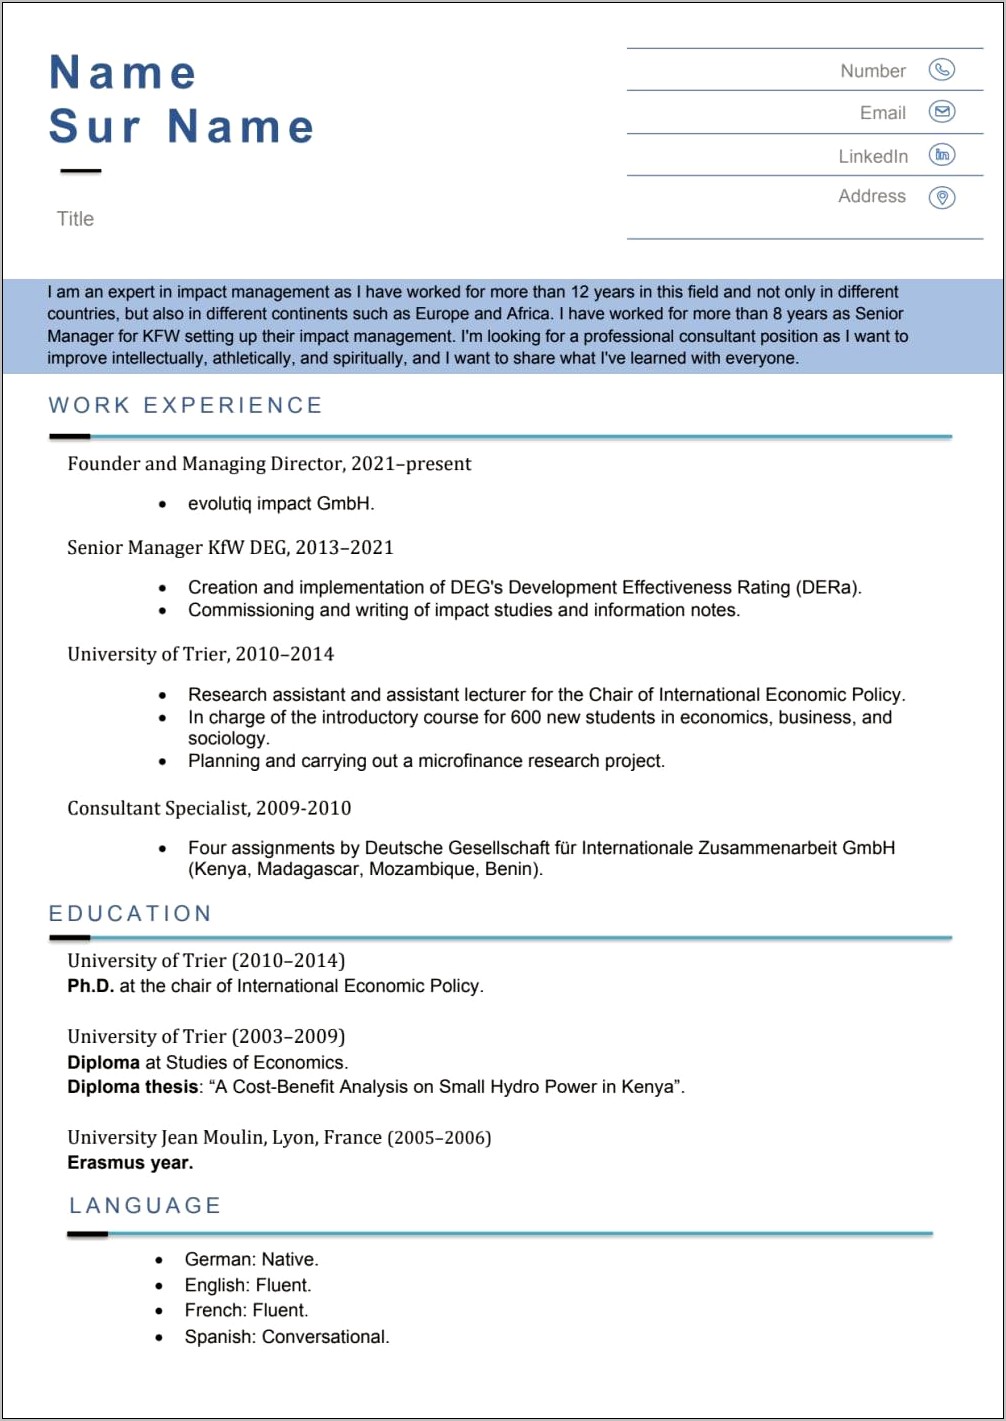 Fairfield University Resume And Cover Letter Pdf